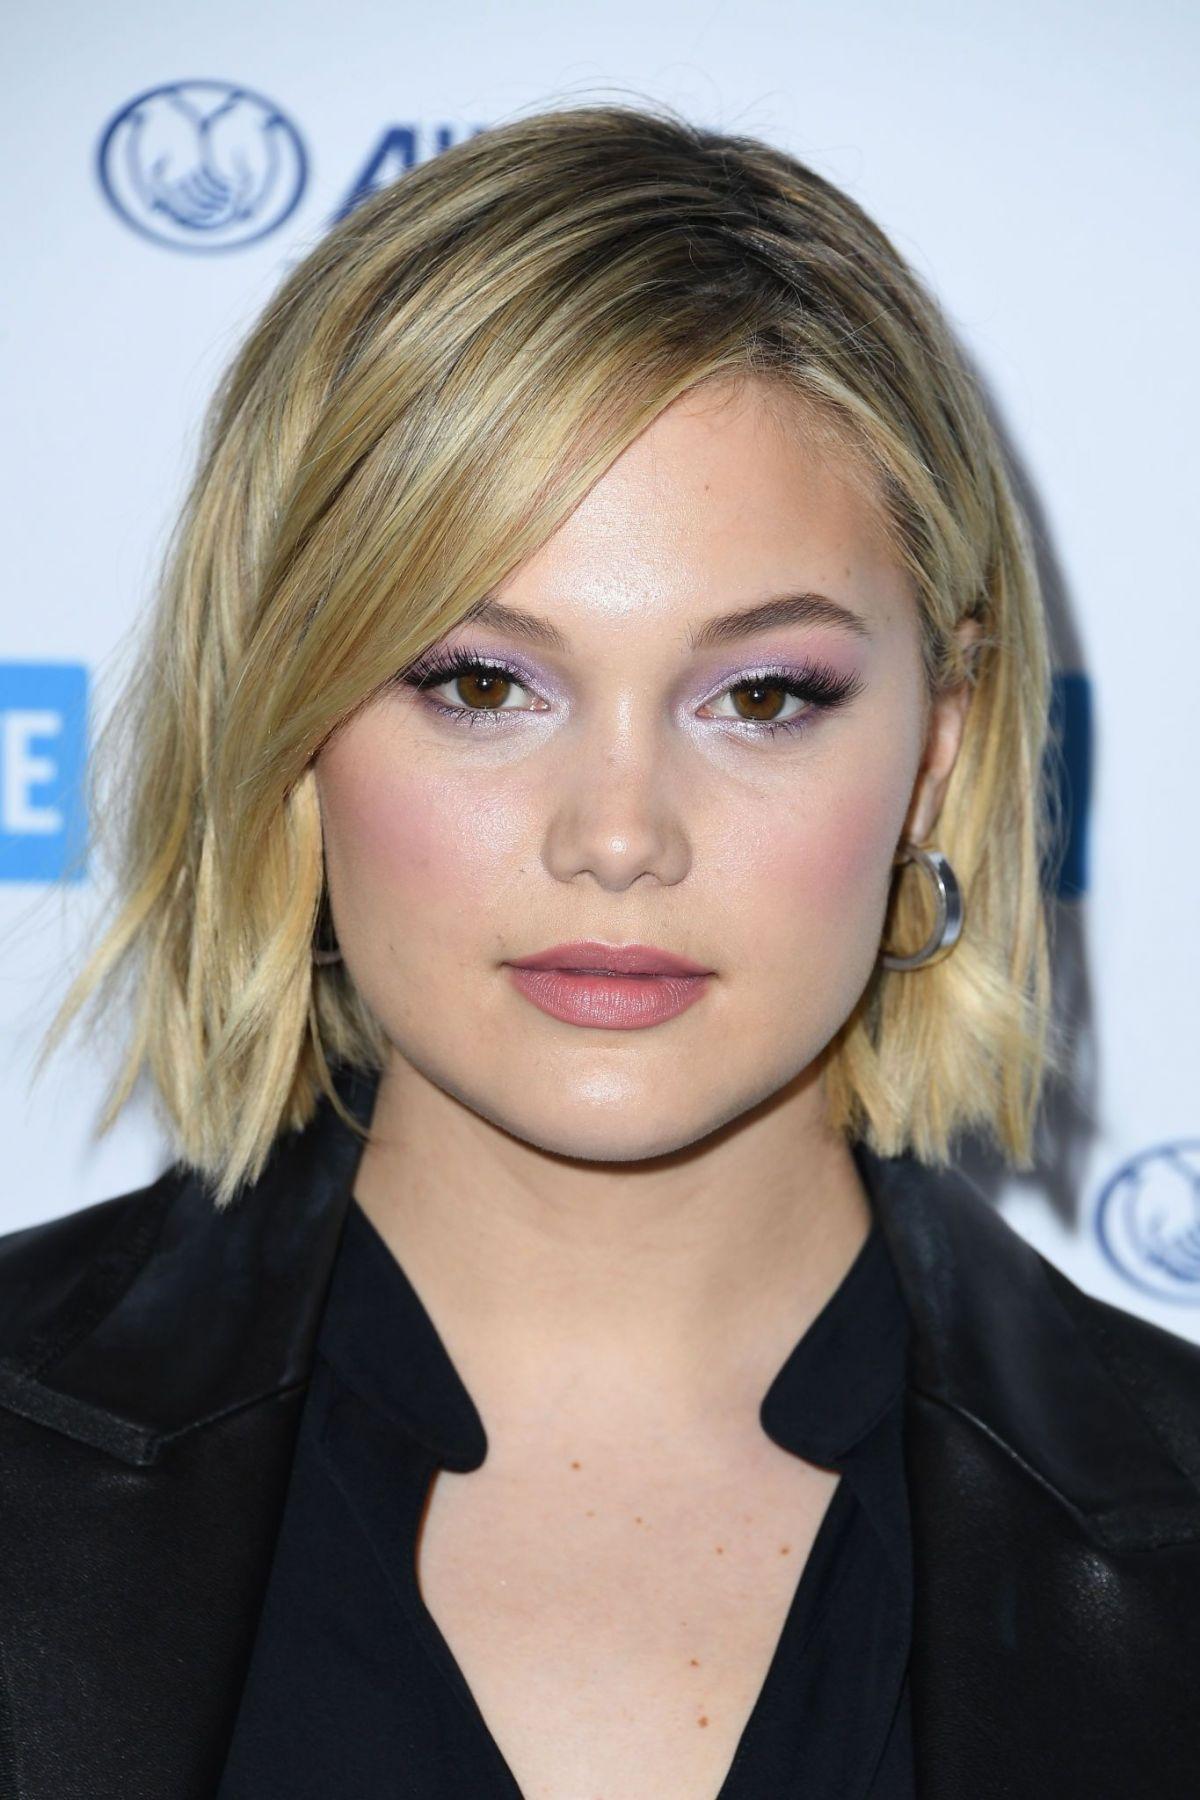 70+ Hot Pictures Of Olivia Holt – Dagger Actress In Cloak And Dagger TV Series 33